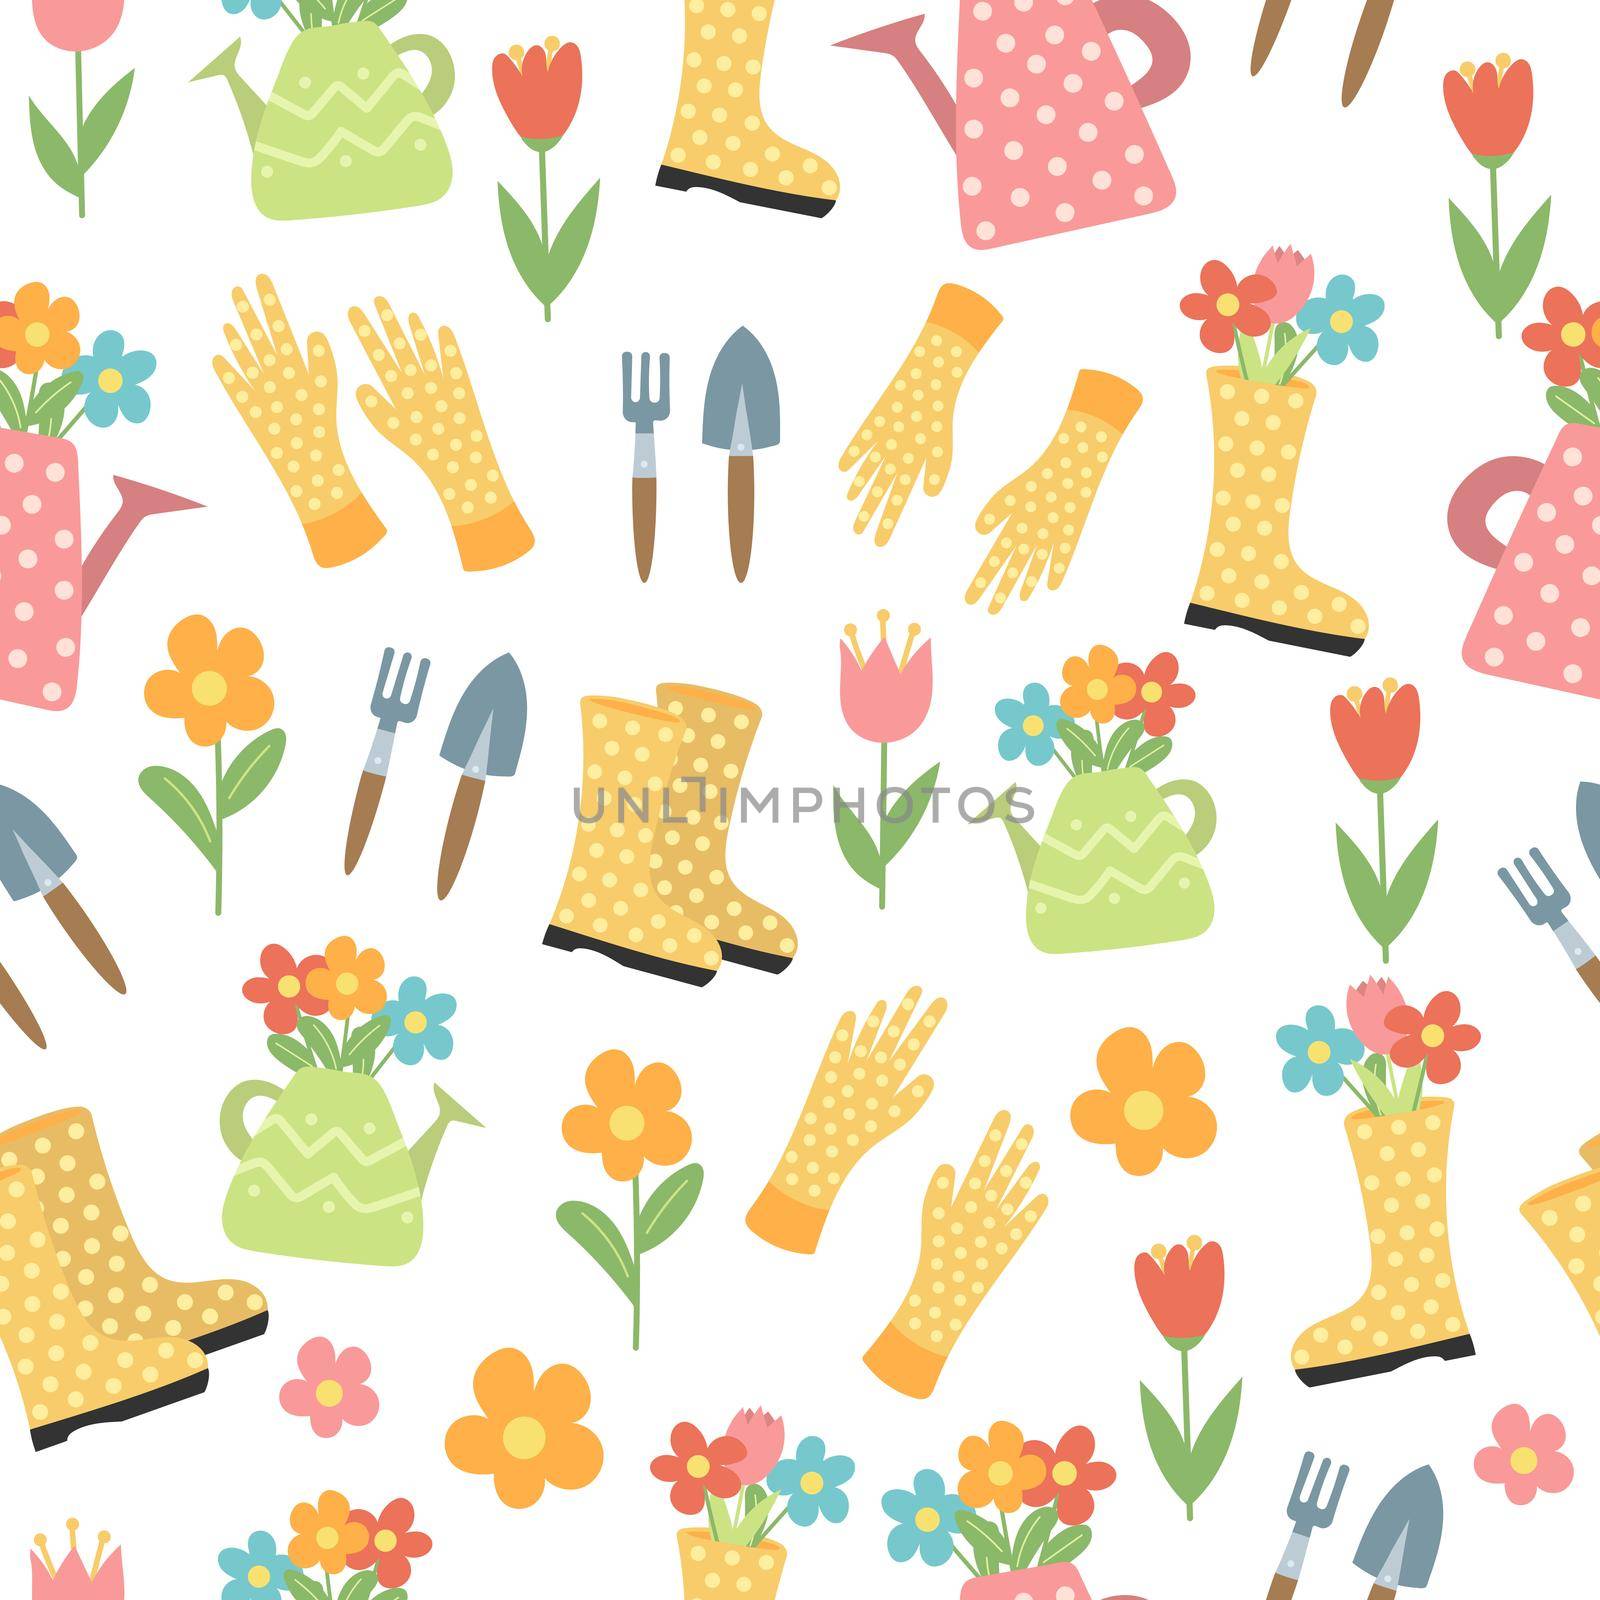 Seamless pattern with flowers, rubber boots, tools. Gardening design on white